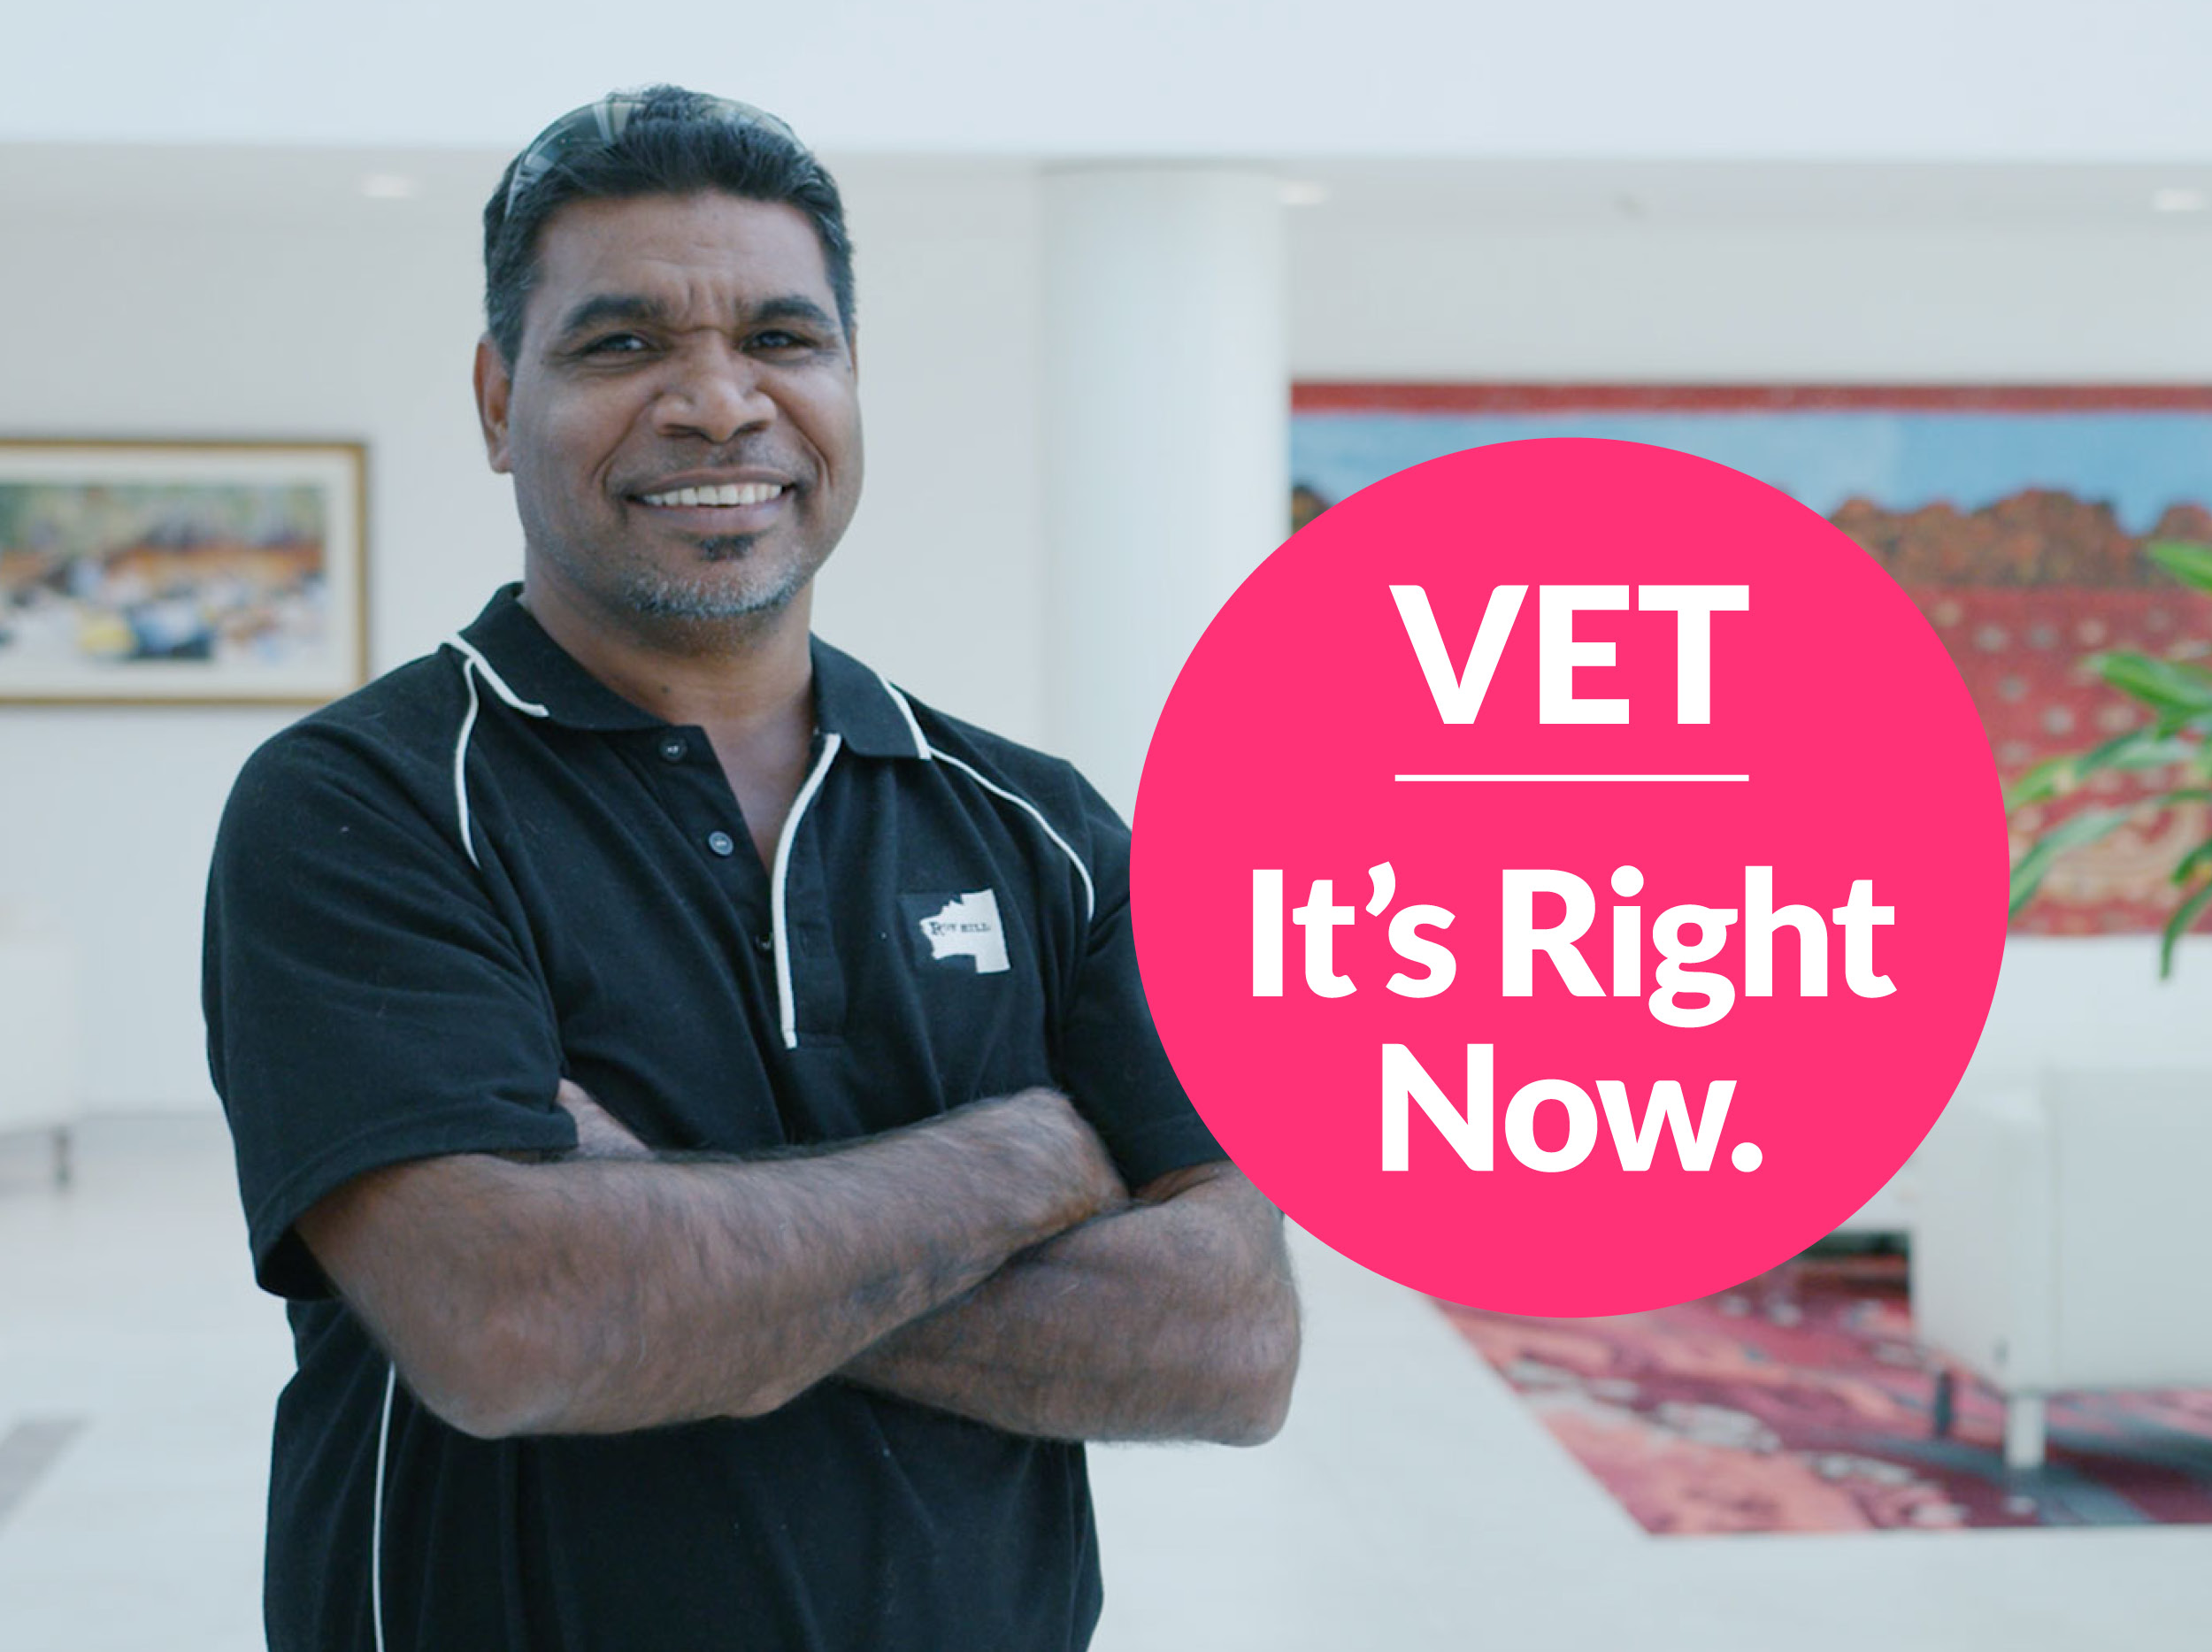 A First Nations man is smiling and standing with his arms folded. A pink graphic circle is in the foreground with the copy, 'VET: It's Right Now.'